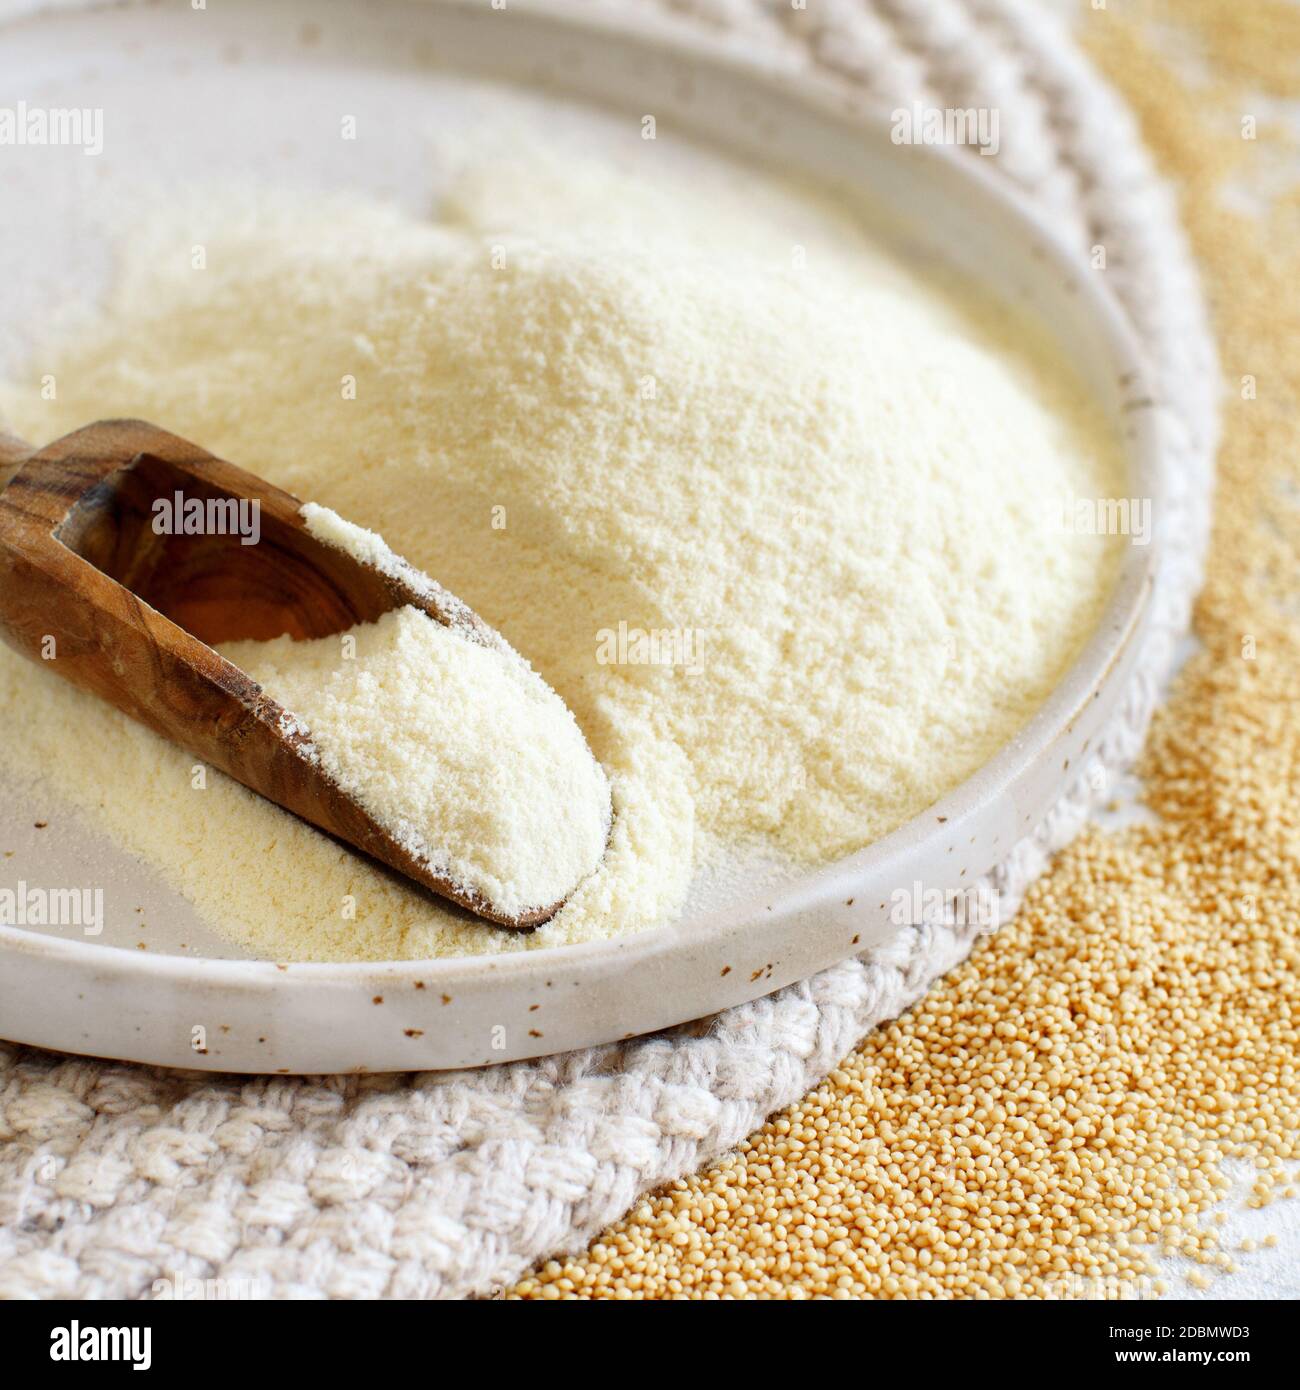 Plate of raw Amaranth flour with a spoon and Amaranth seeds close up Stock Photo